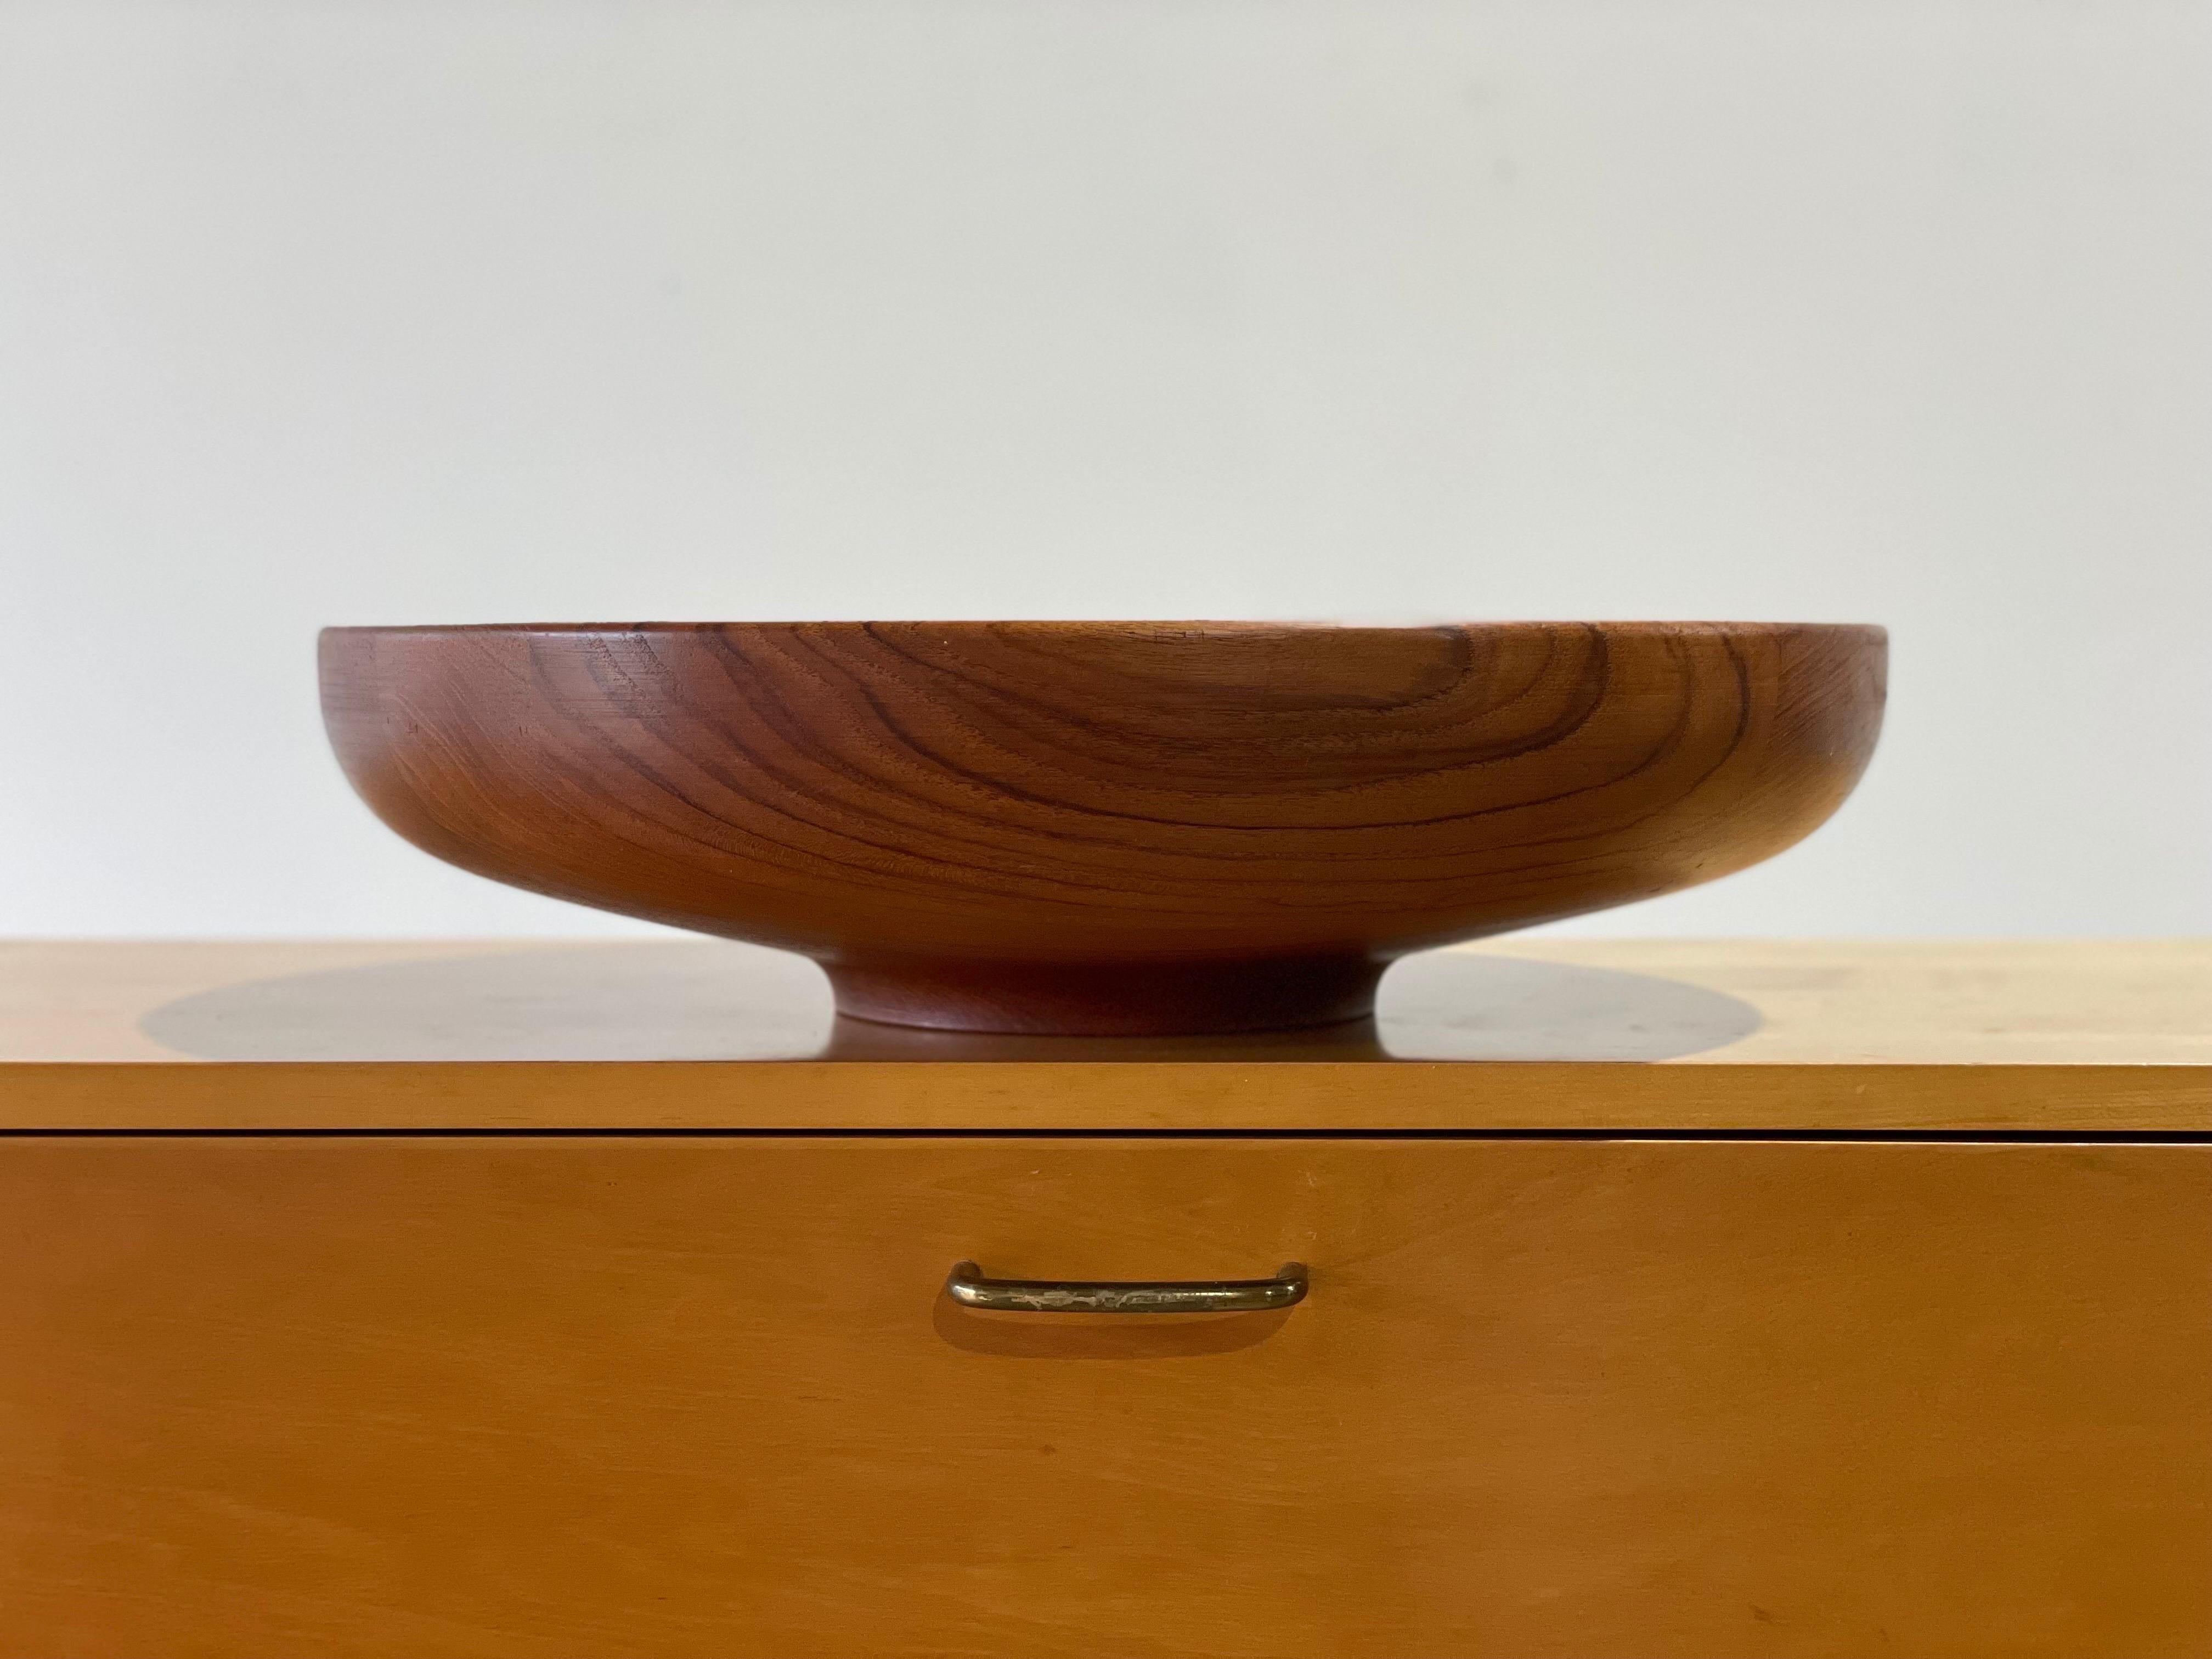 Oversized Henning Koppel for Georg Jensen teak bowl. Staved and turned old growth teak. Gorgeous form and refined silouhette. Excellent original condition - this example looks to have been hardly, if ever used. Our team of in-house craftspeople has